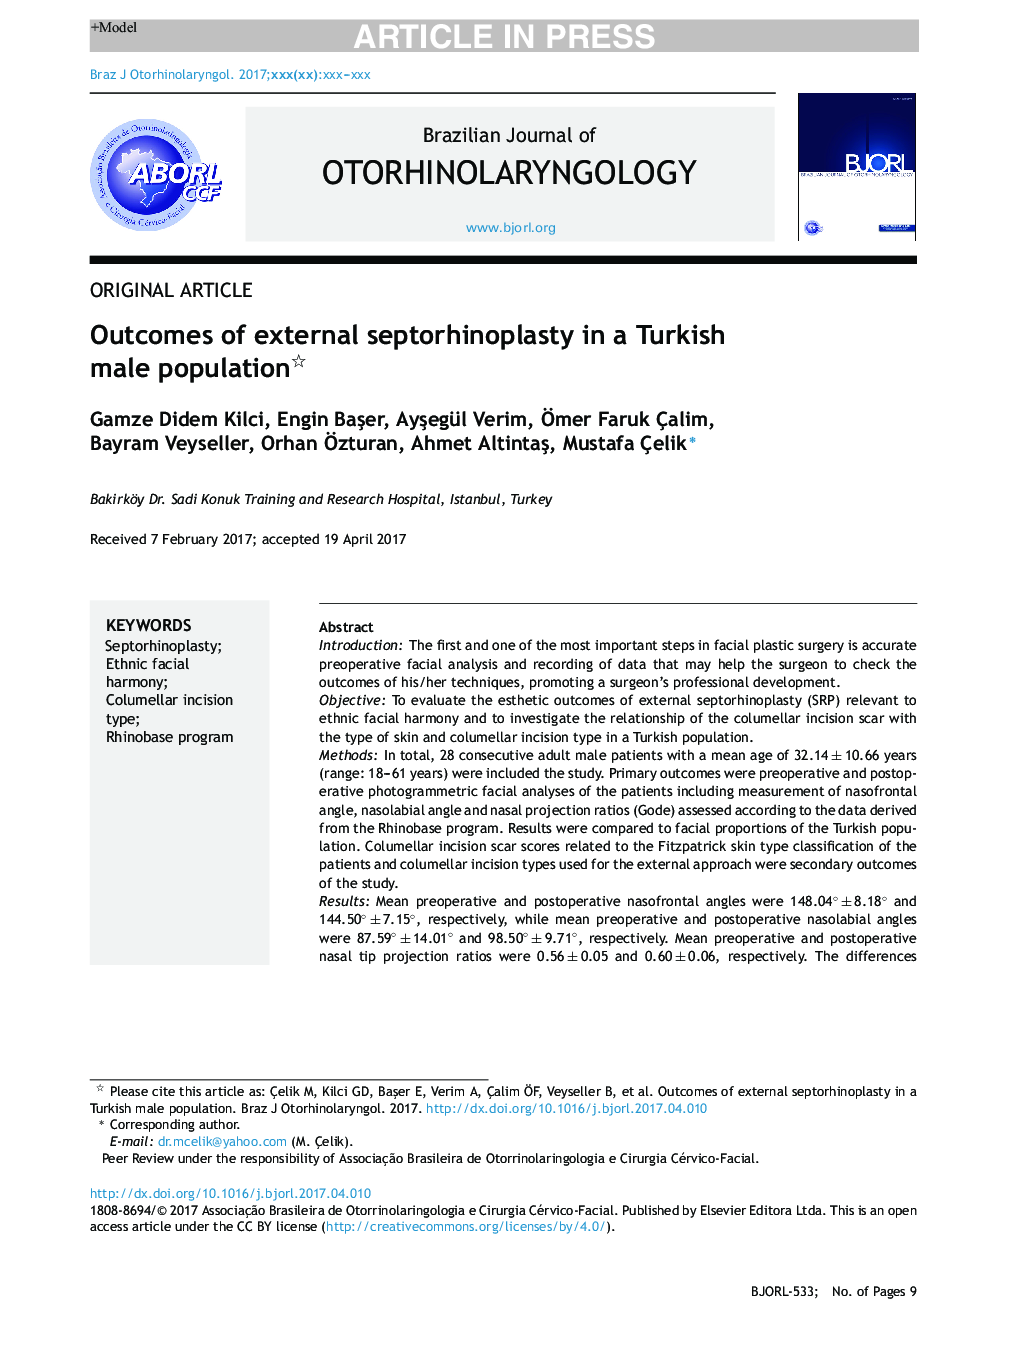 Outcomes of external septorhinoplasty in a Turkish male population